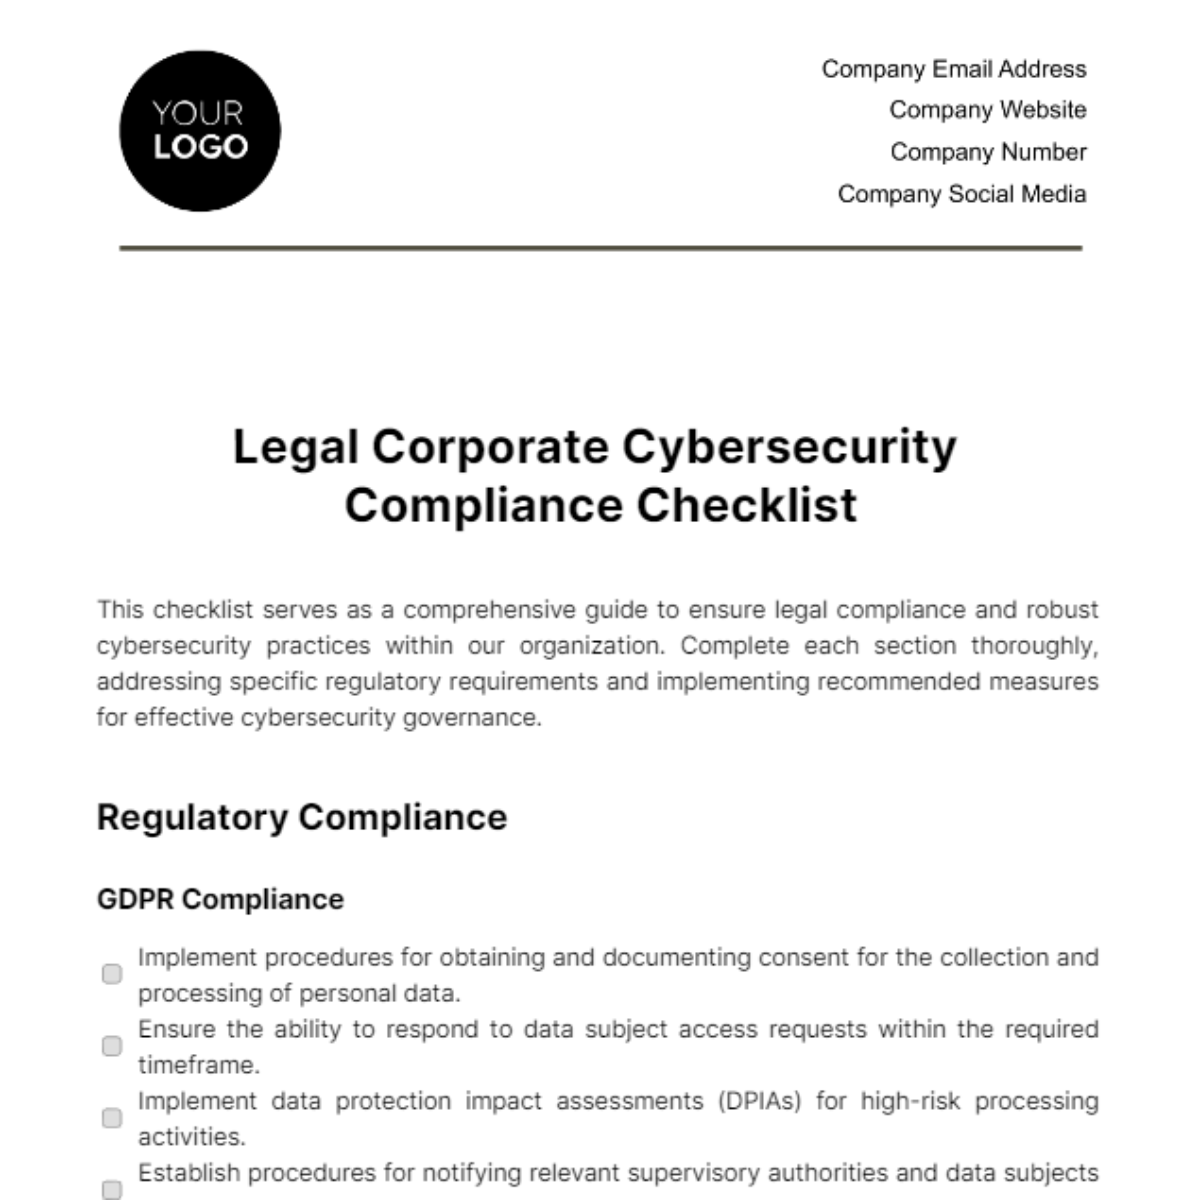 Legal Corporate Cybersecurity Compliance Checklist Template